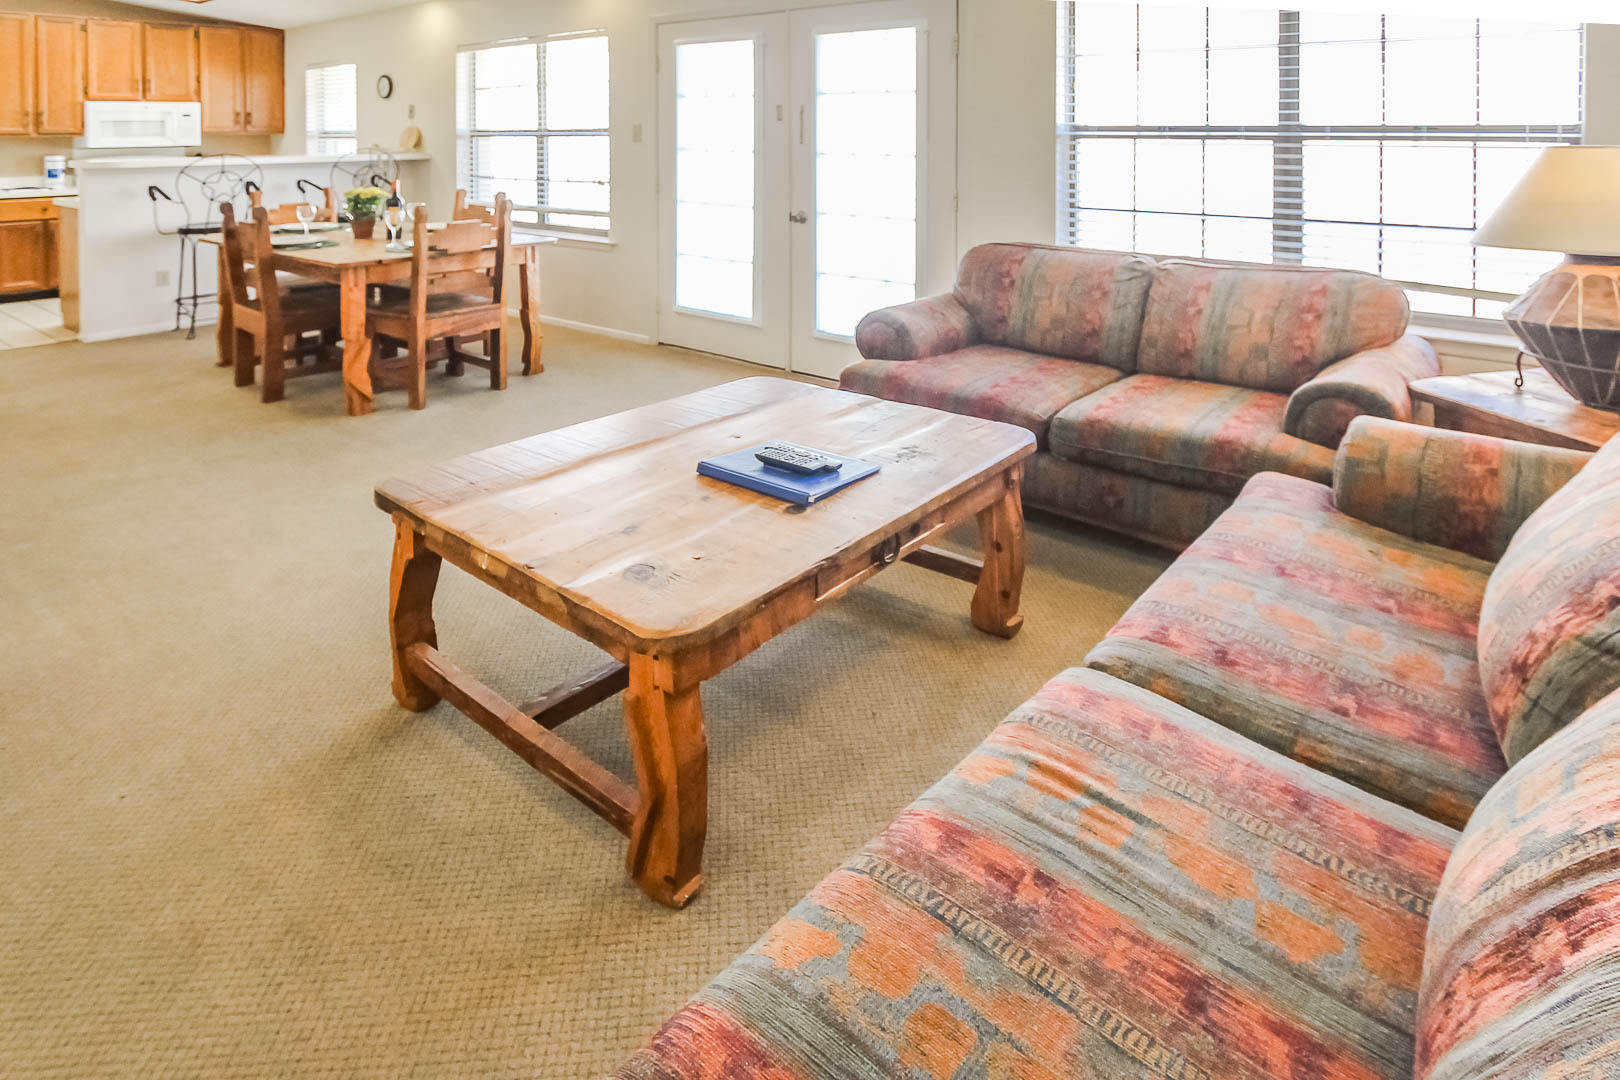 A spacious living room and kitchen  at VRI's Vacation Village at Lake Travis in Texas.